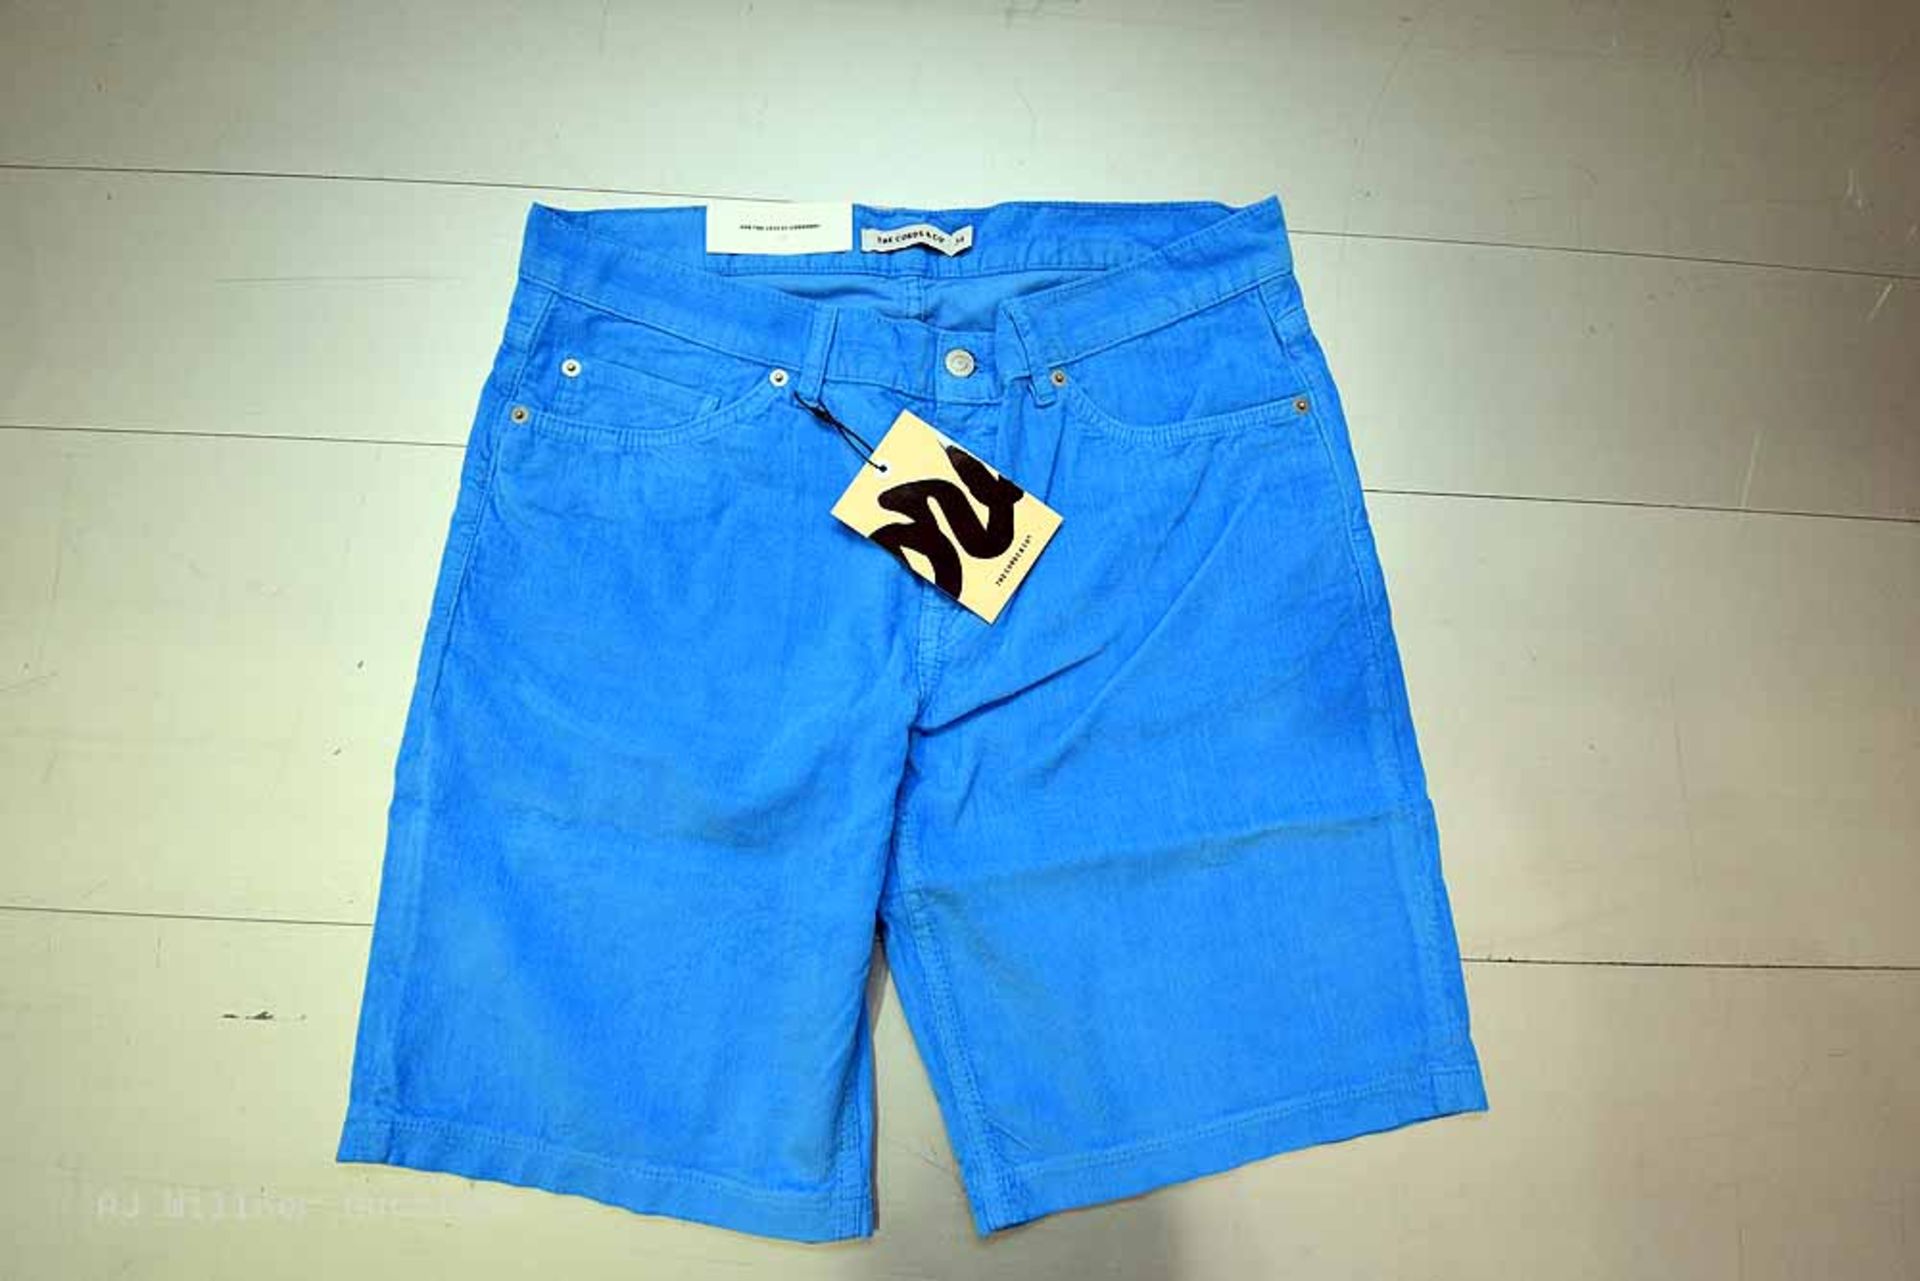 The Cords & Co. "Adam" Style, Men's 5-Pocket Mid-Waist/Classic Fit Shorts,Azure/Silver/Turq/Indigo - Image 5 of 10